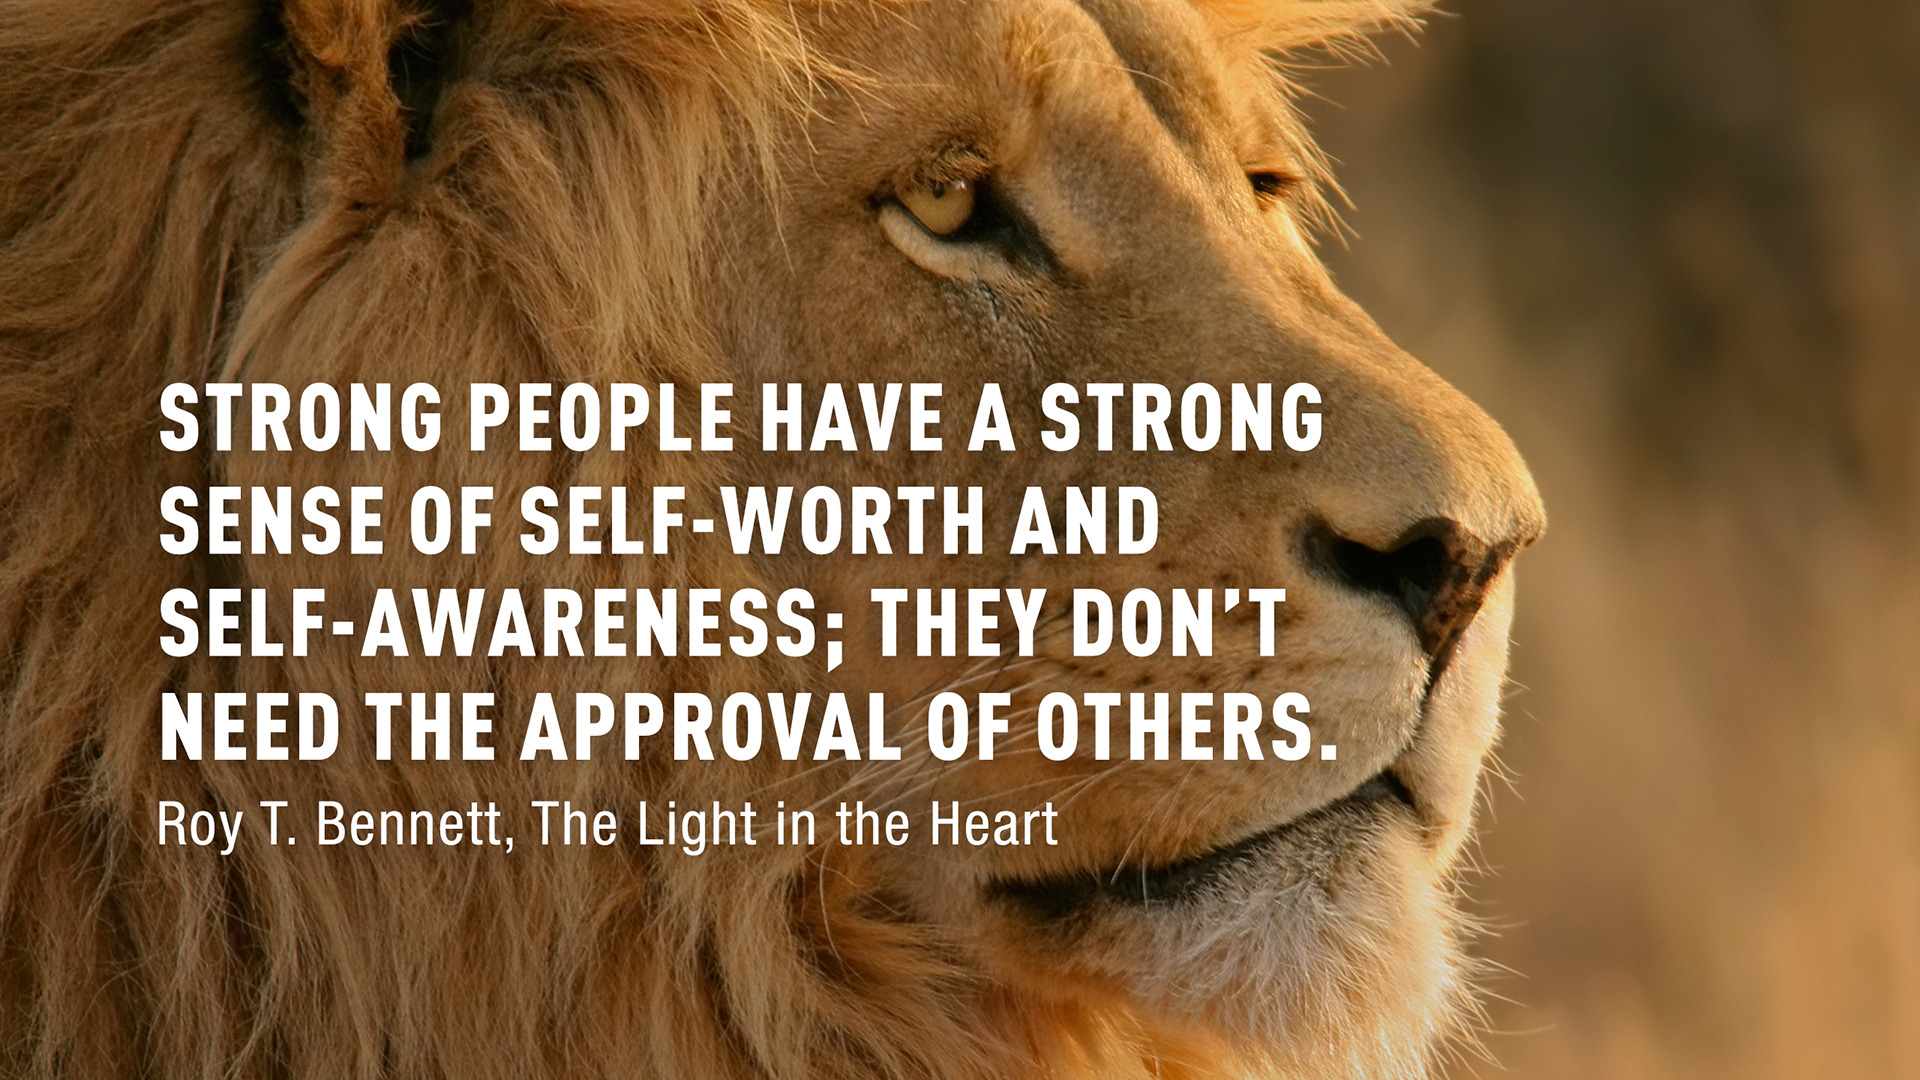 Strong-people-have-a-strong-sense_Roy-T-Benett_THe-Light-in-the-Heart_2560